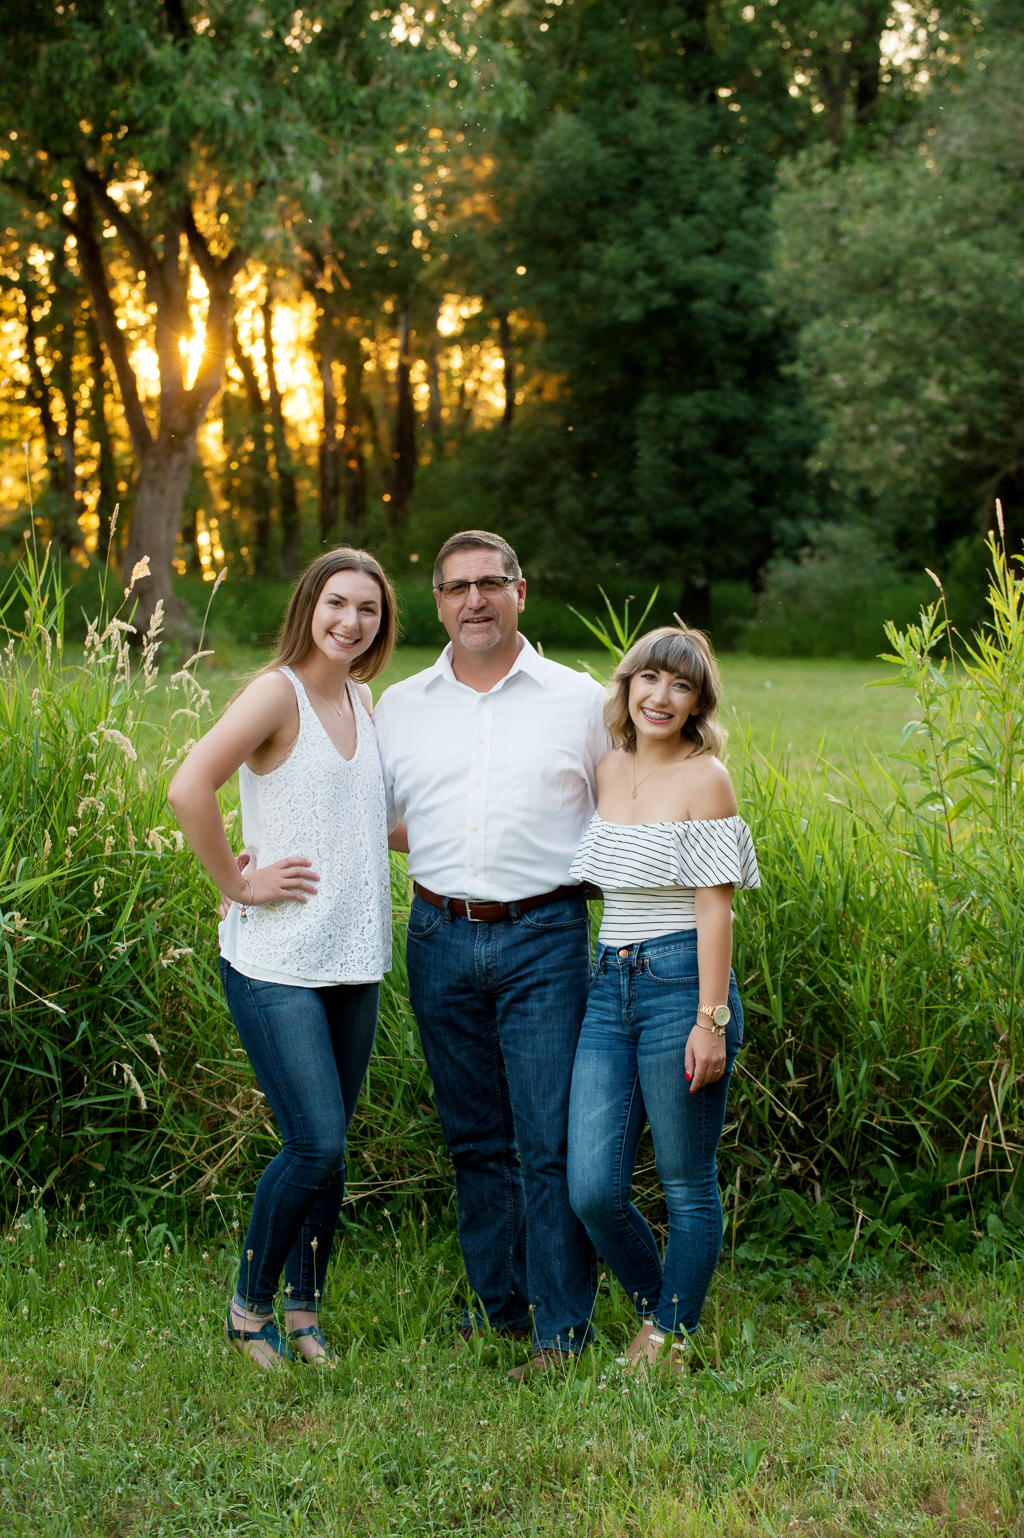 dad with his two daughters in front of trees and a golden sunset